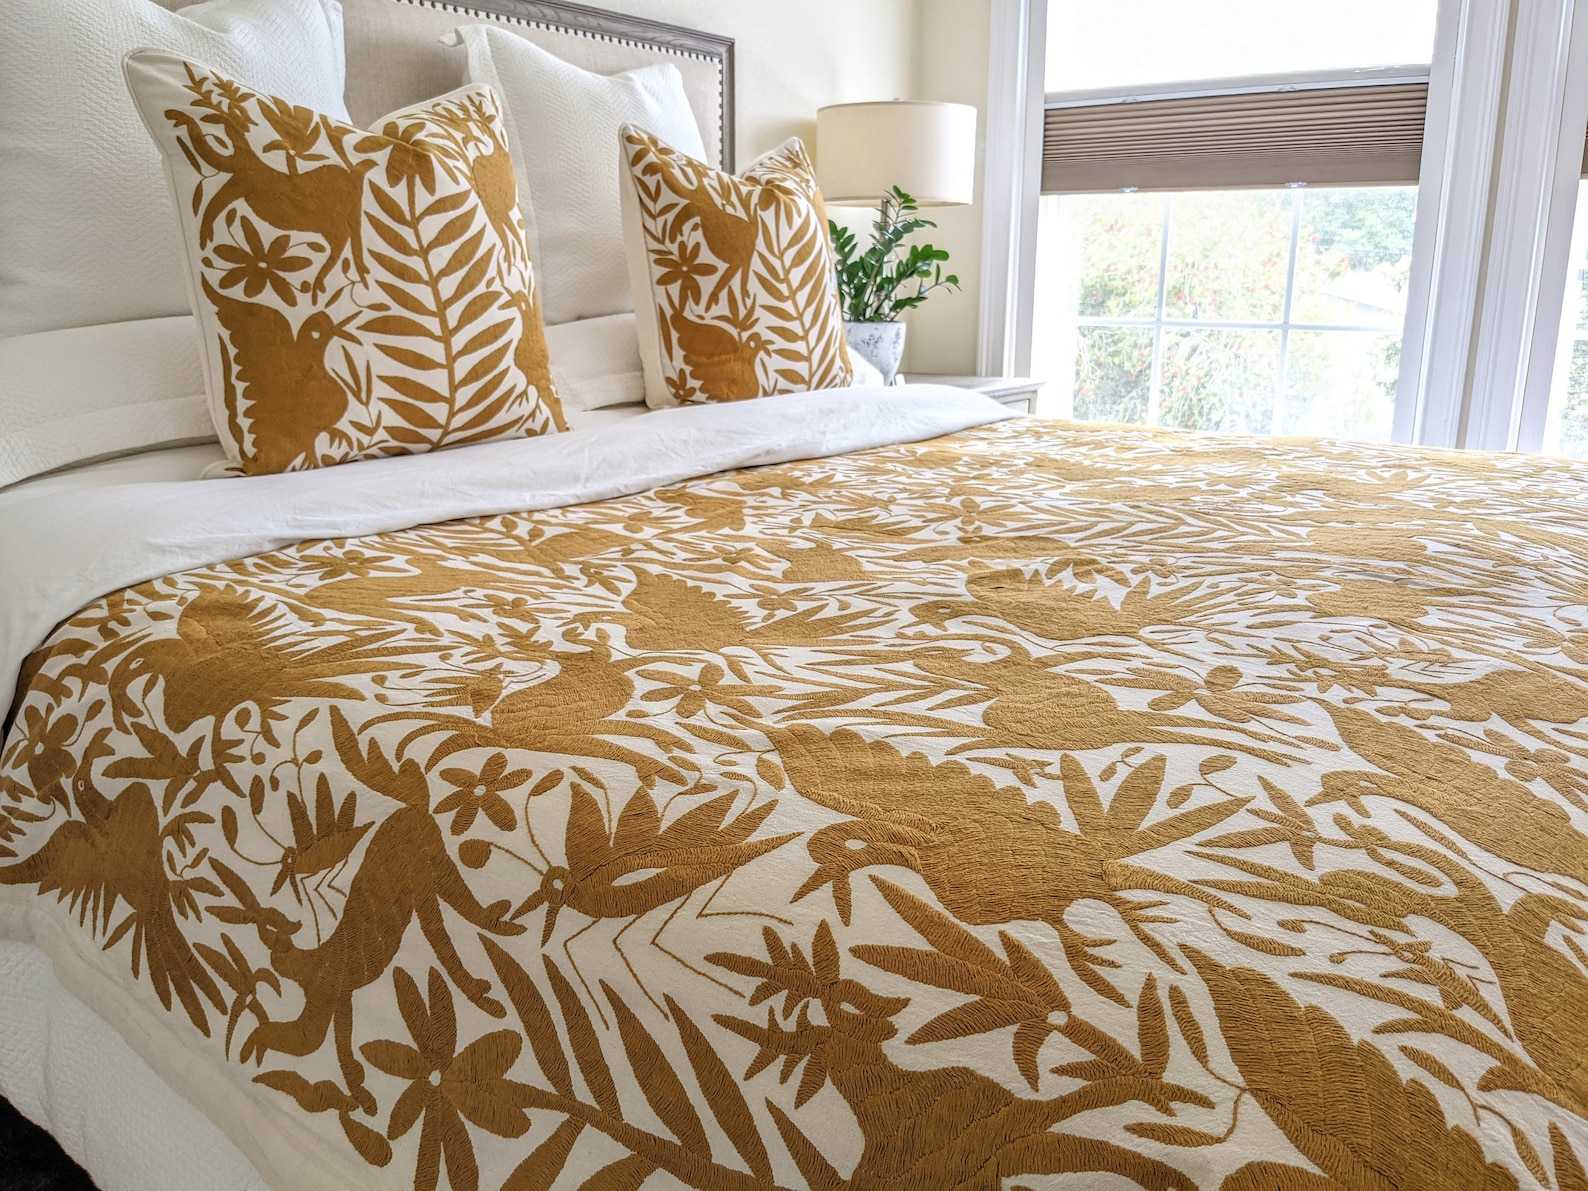 NNDØ HÜNI (Etsy) Made-To-Order Otomi Hand Embroidered Quilt In Amber Ocher Gold